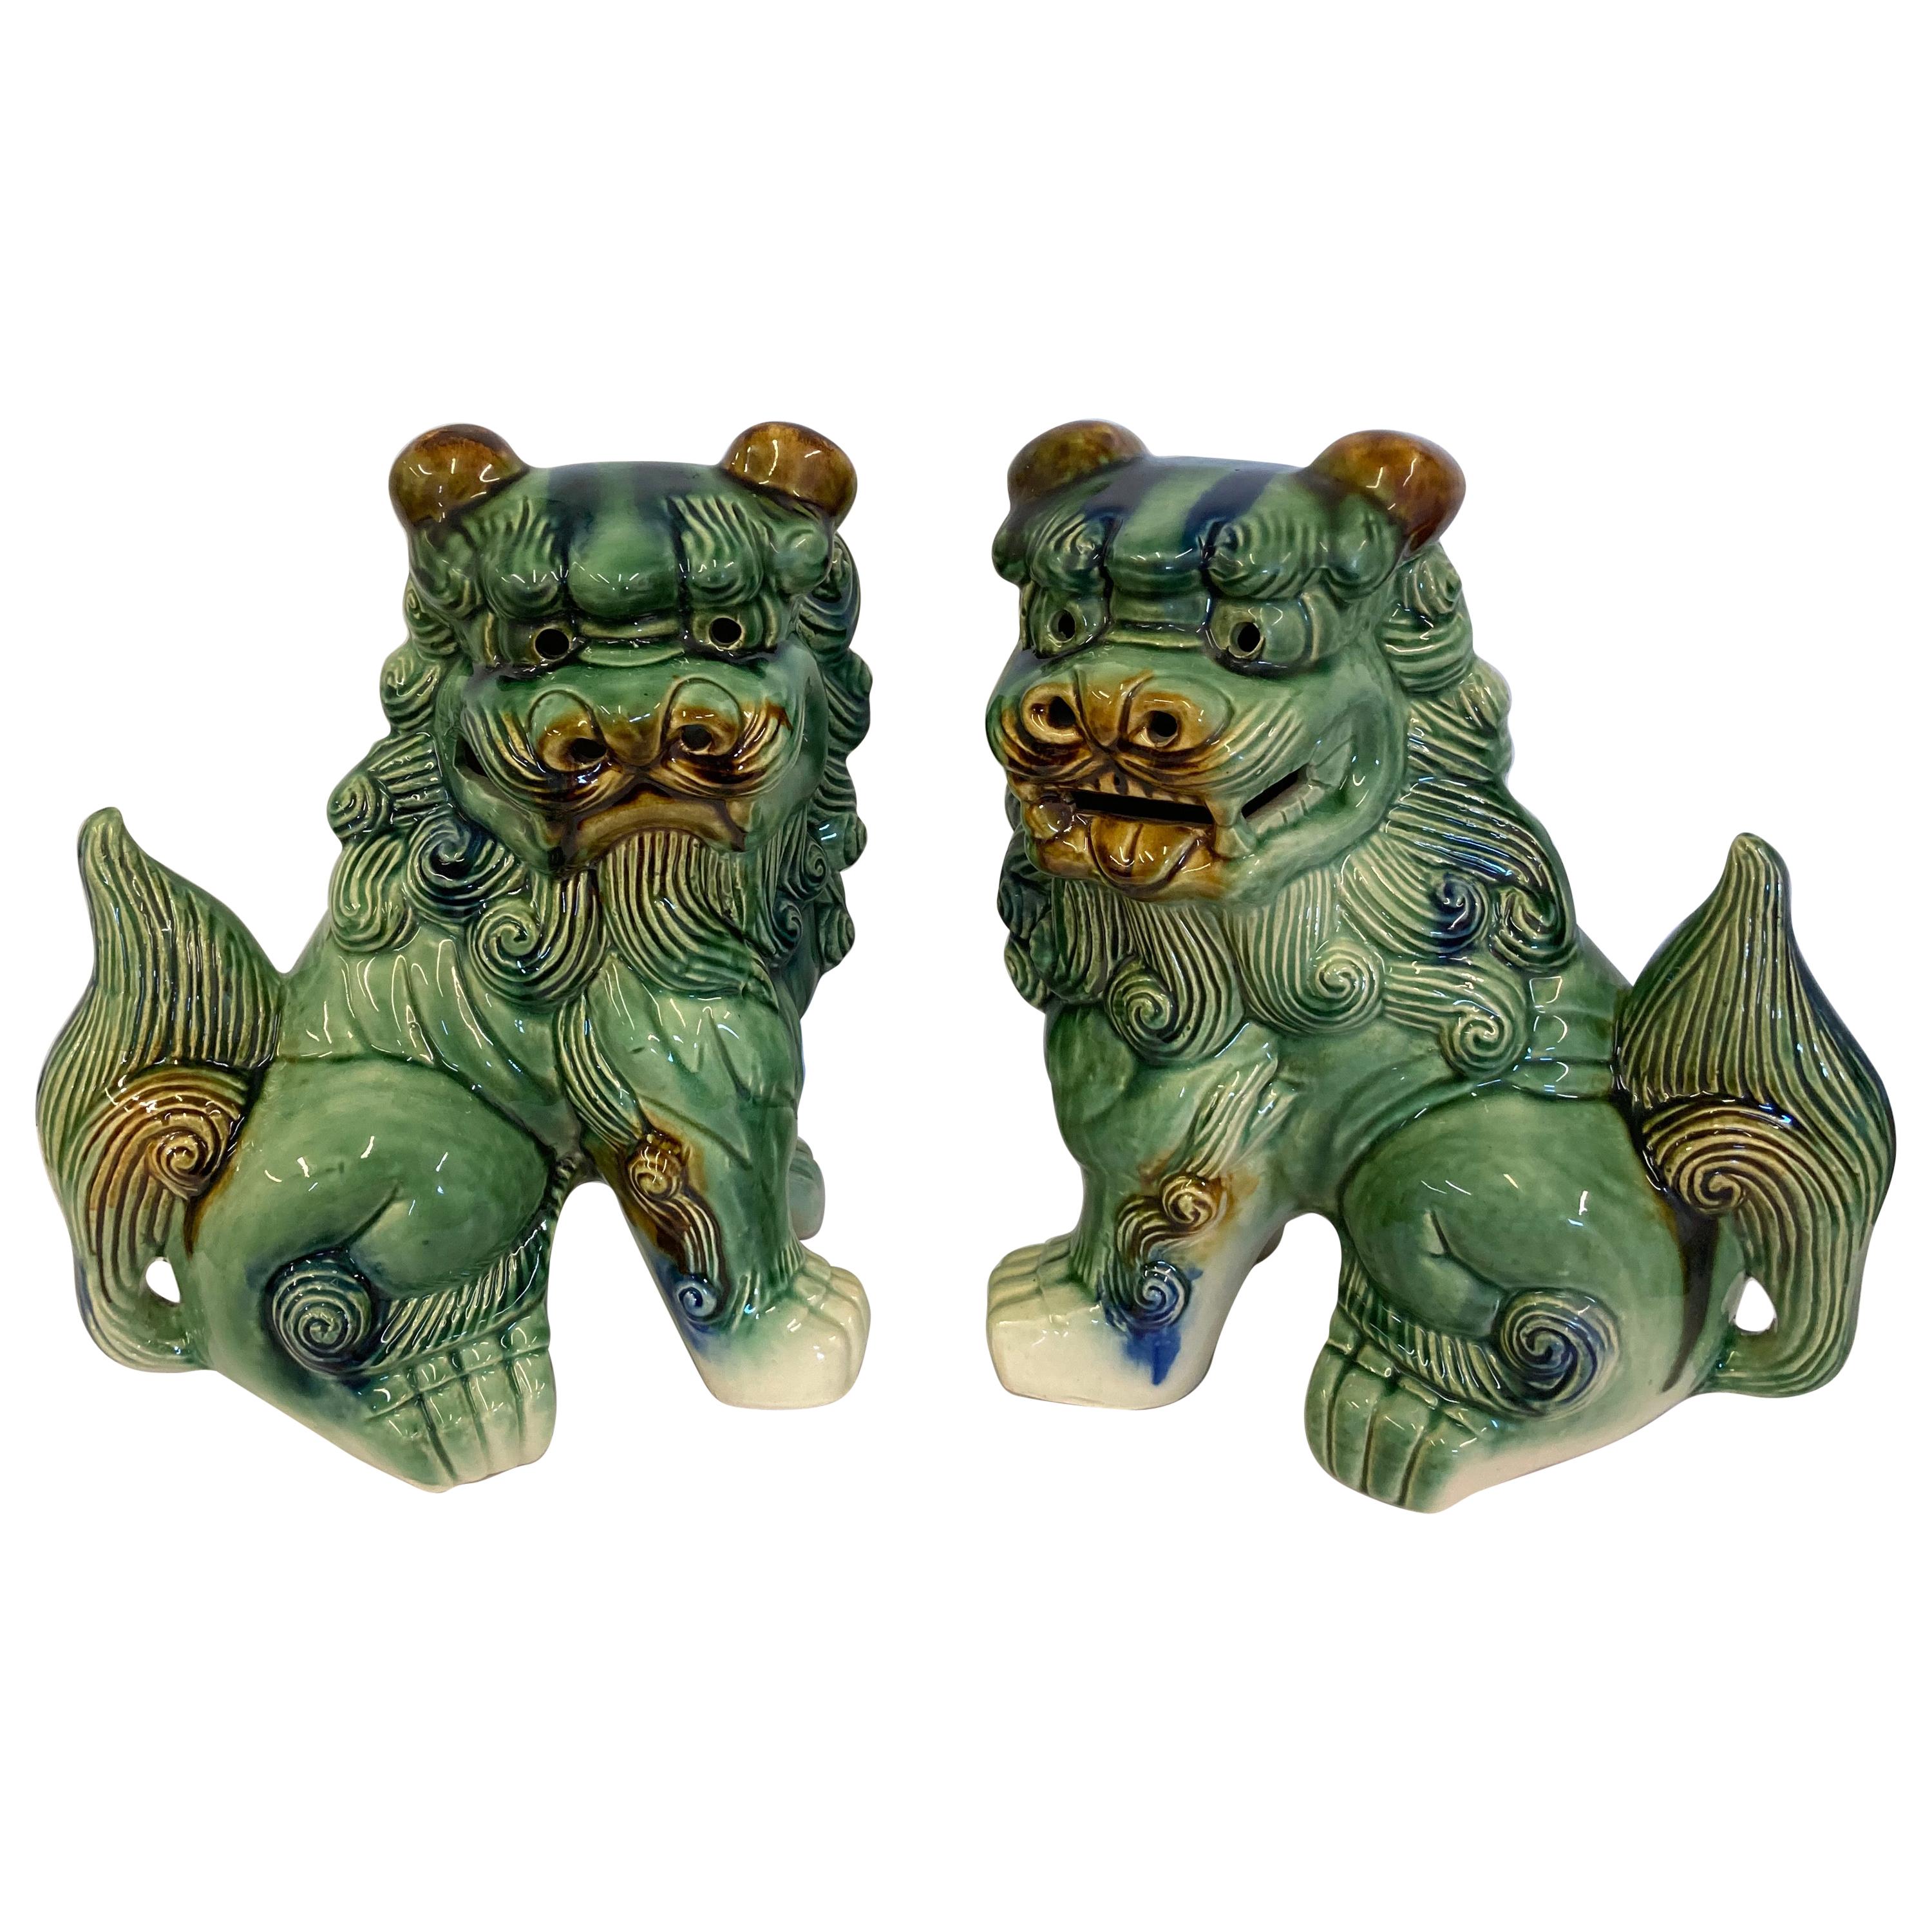 Pair of Vintage/Antique Chinese Porcelain Glazed Foo Dogs Temple Guardians